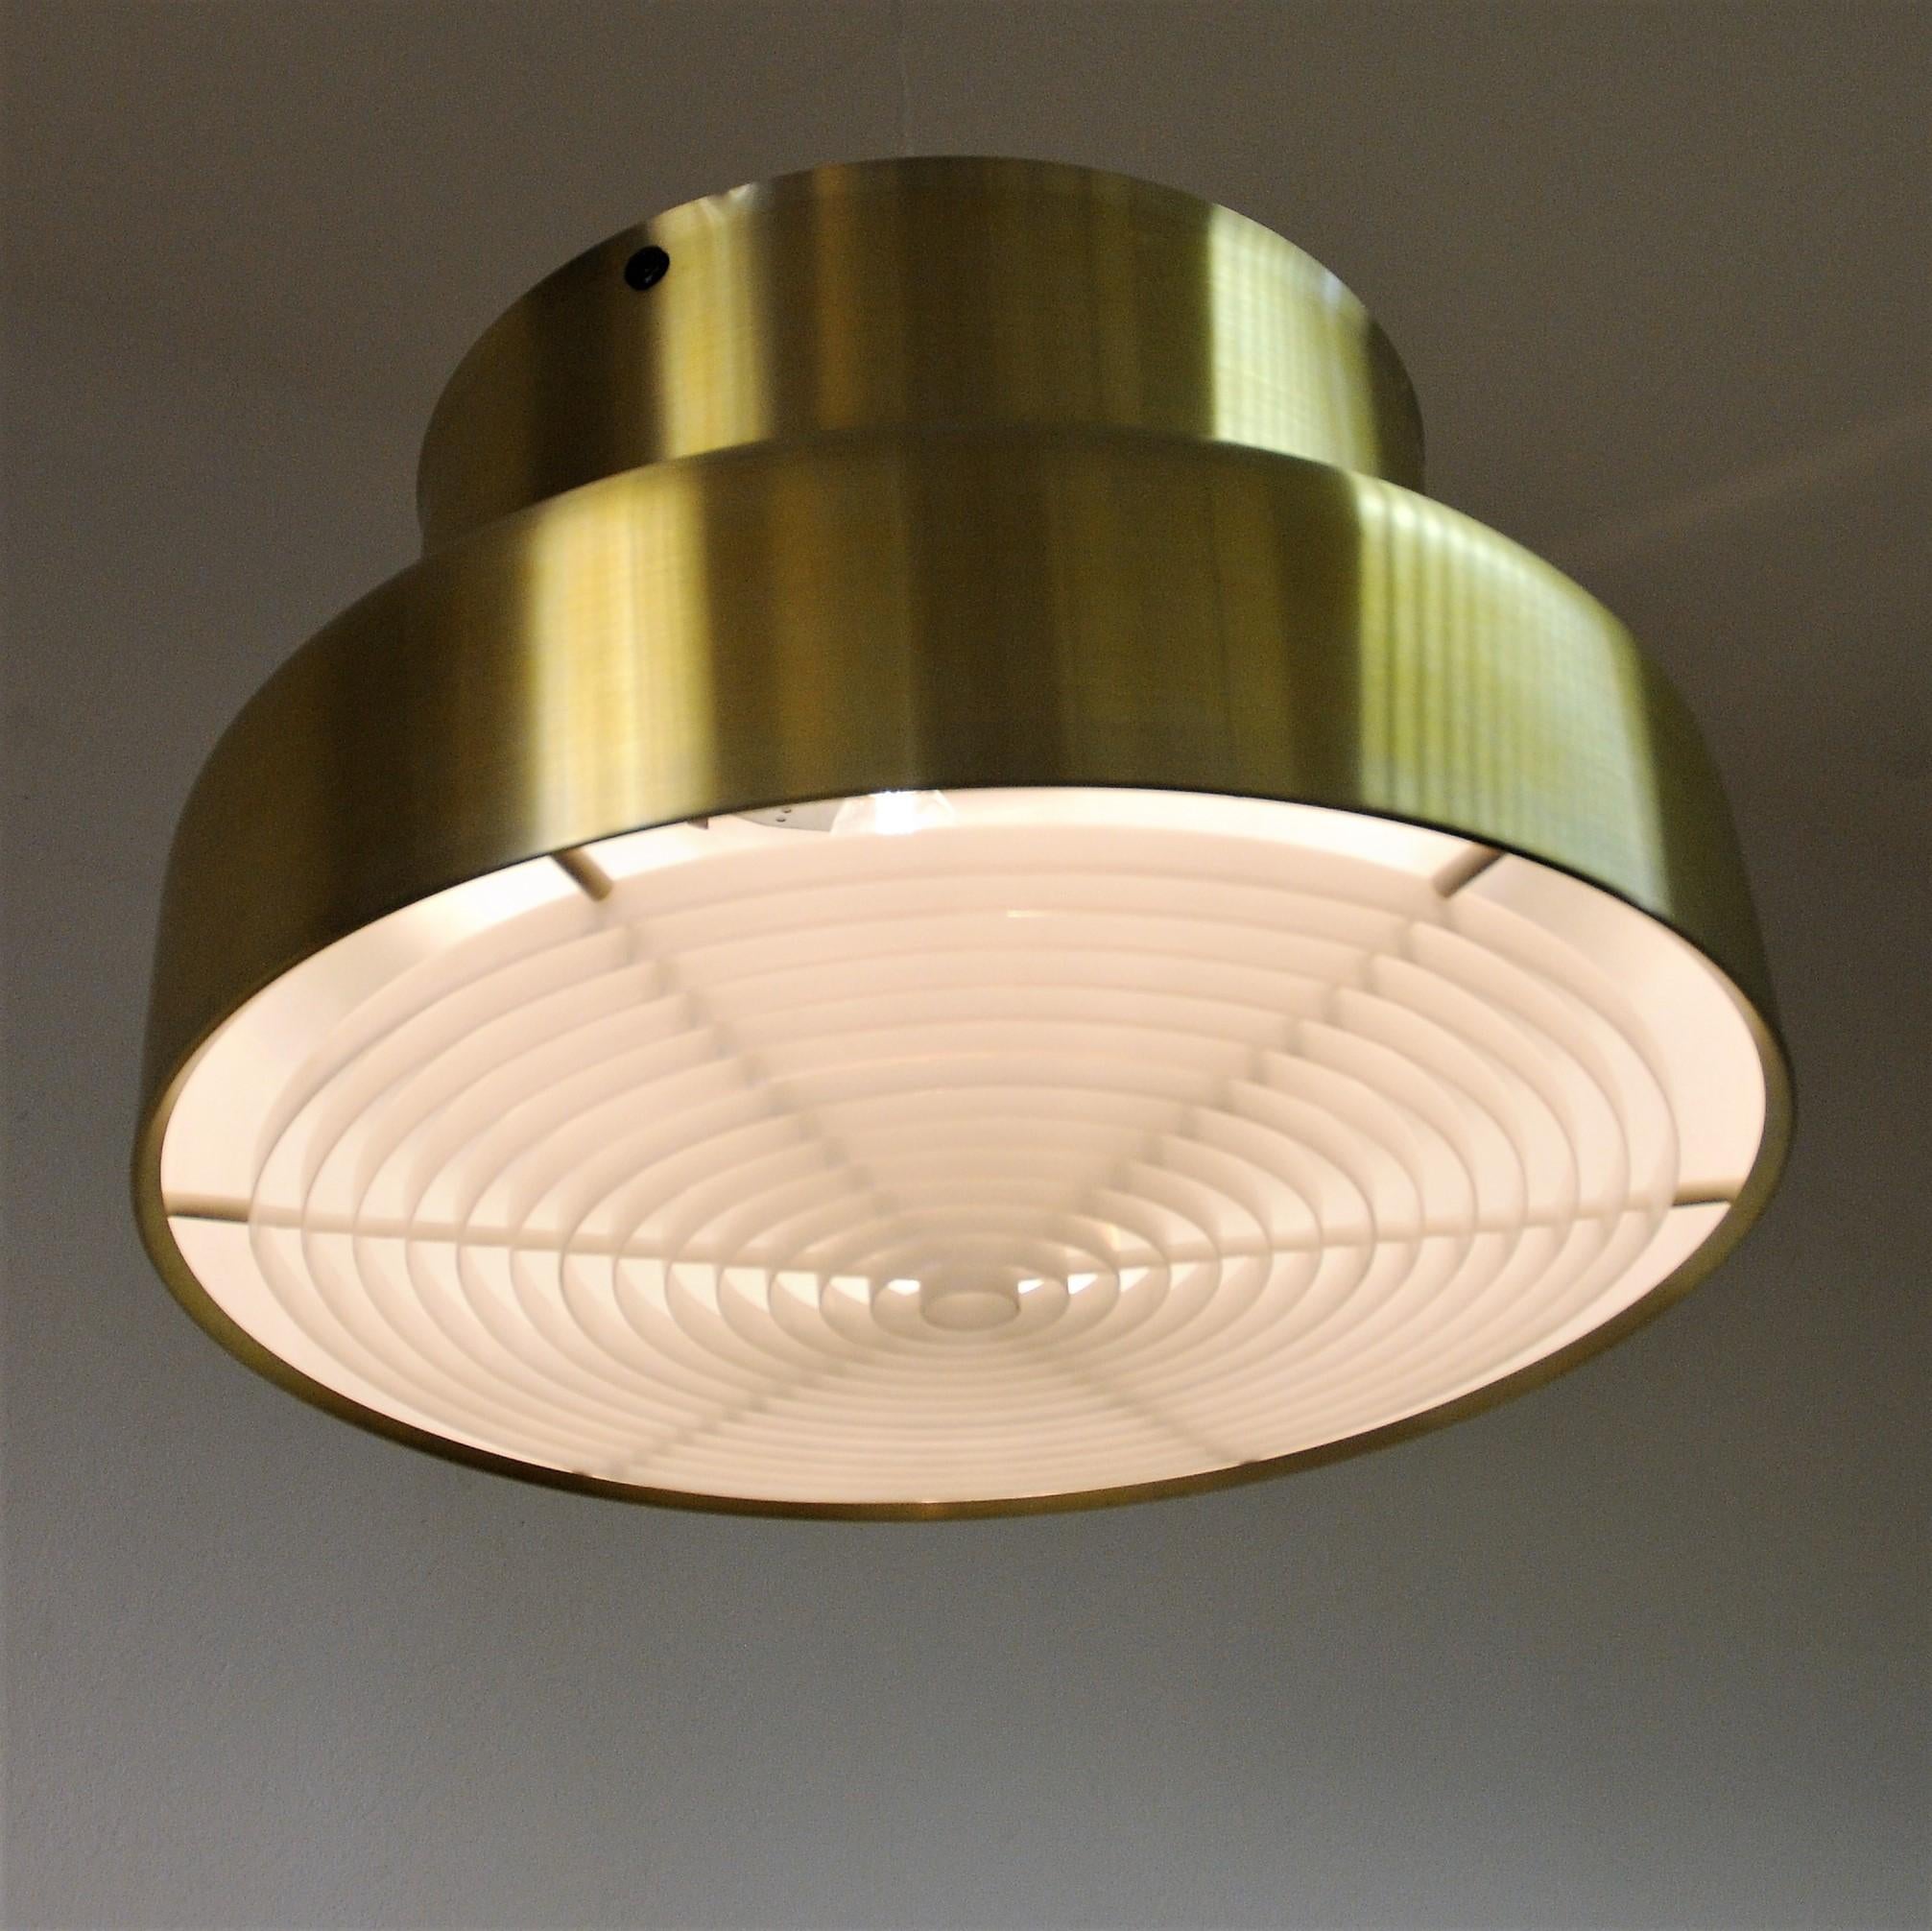 Swedish Bumlingen Ceiling Lamp by Anders Pehrson for Ateljé Lyktan, 1960s